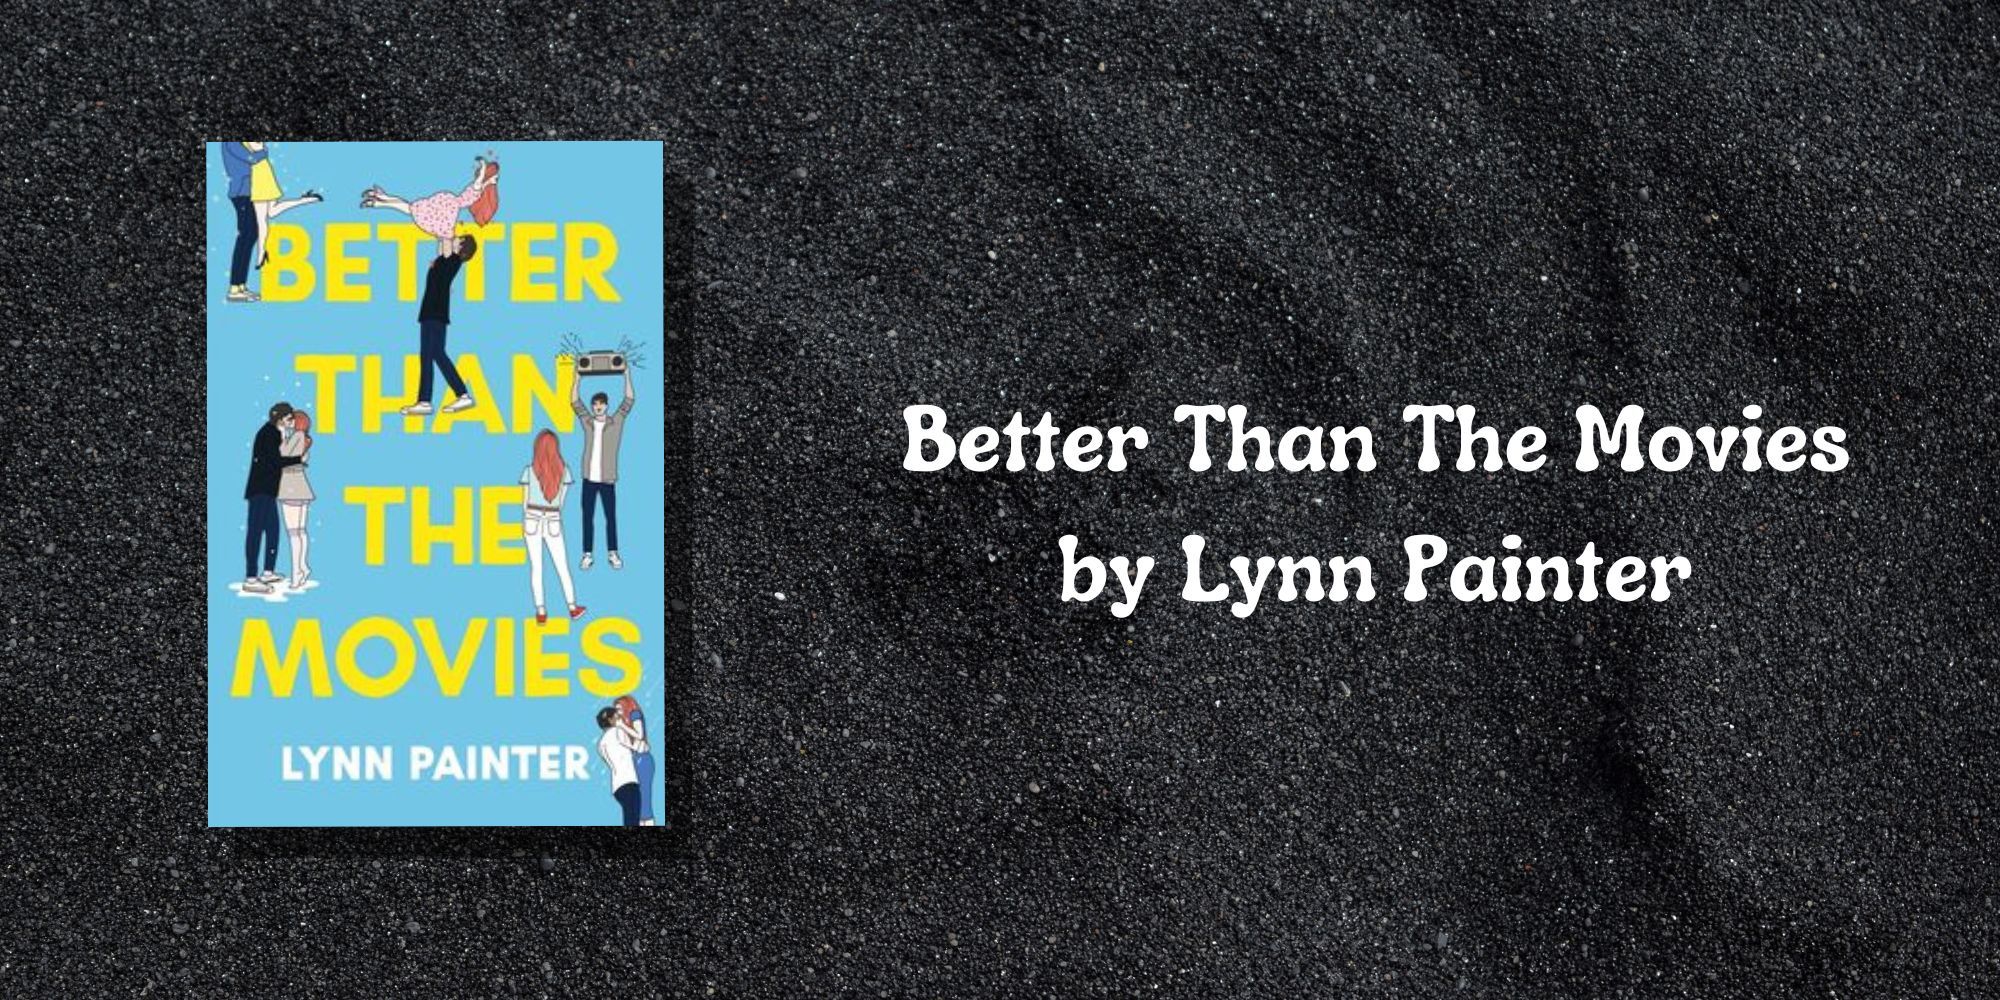 Titled Better Than Movies by Lynn Painter